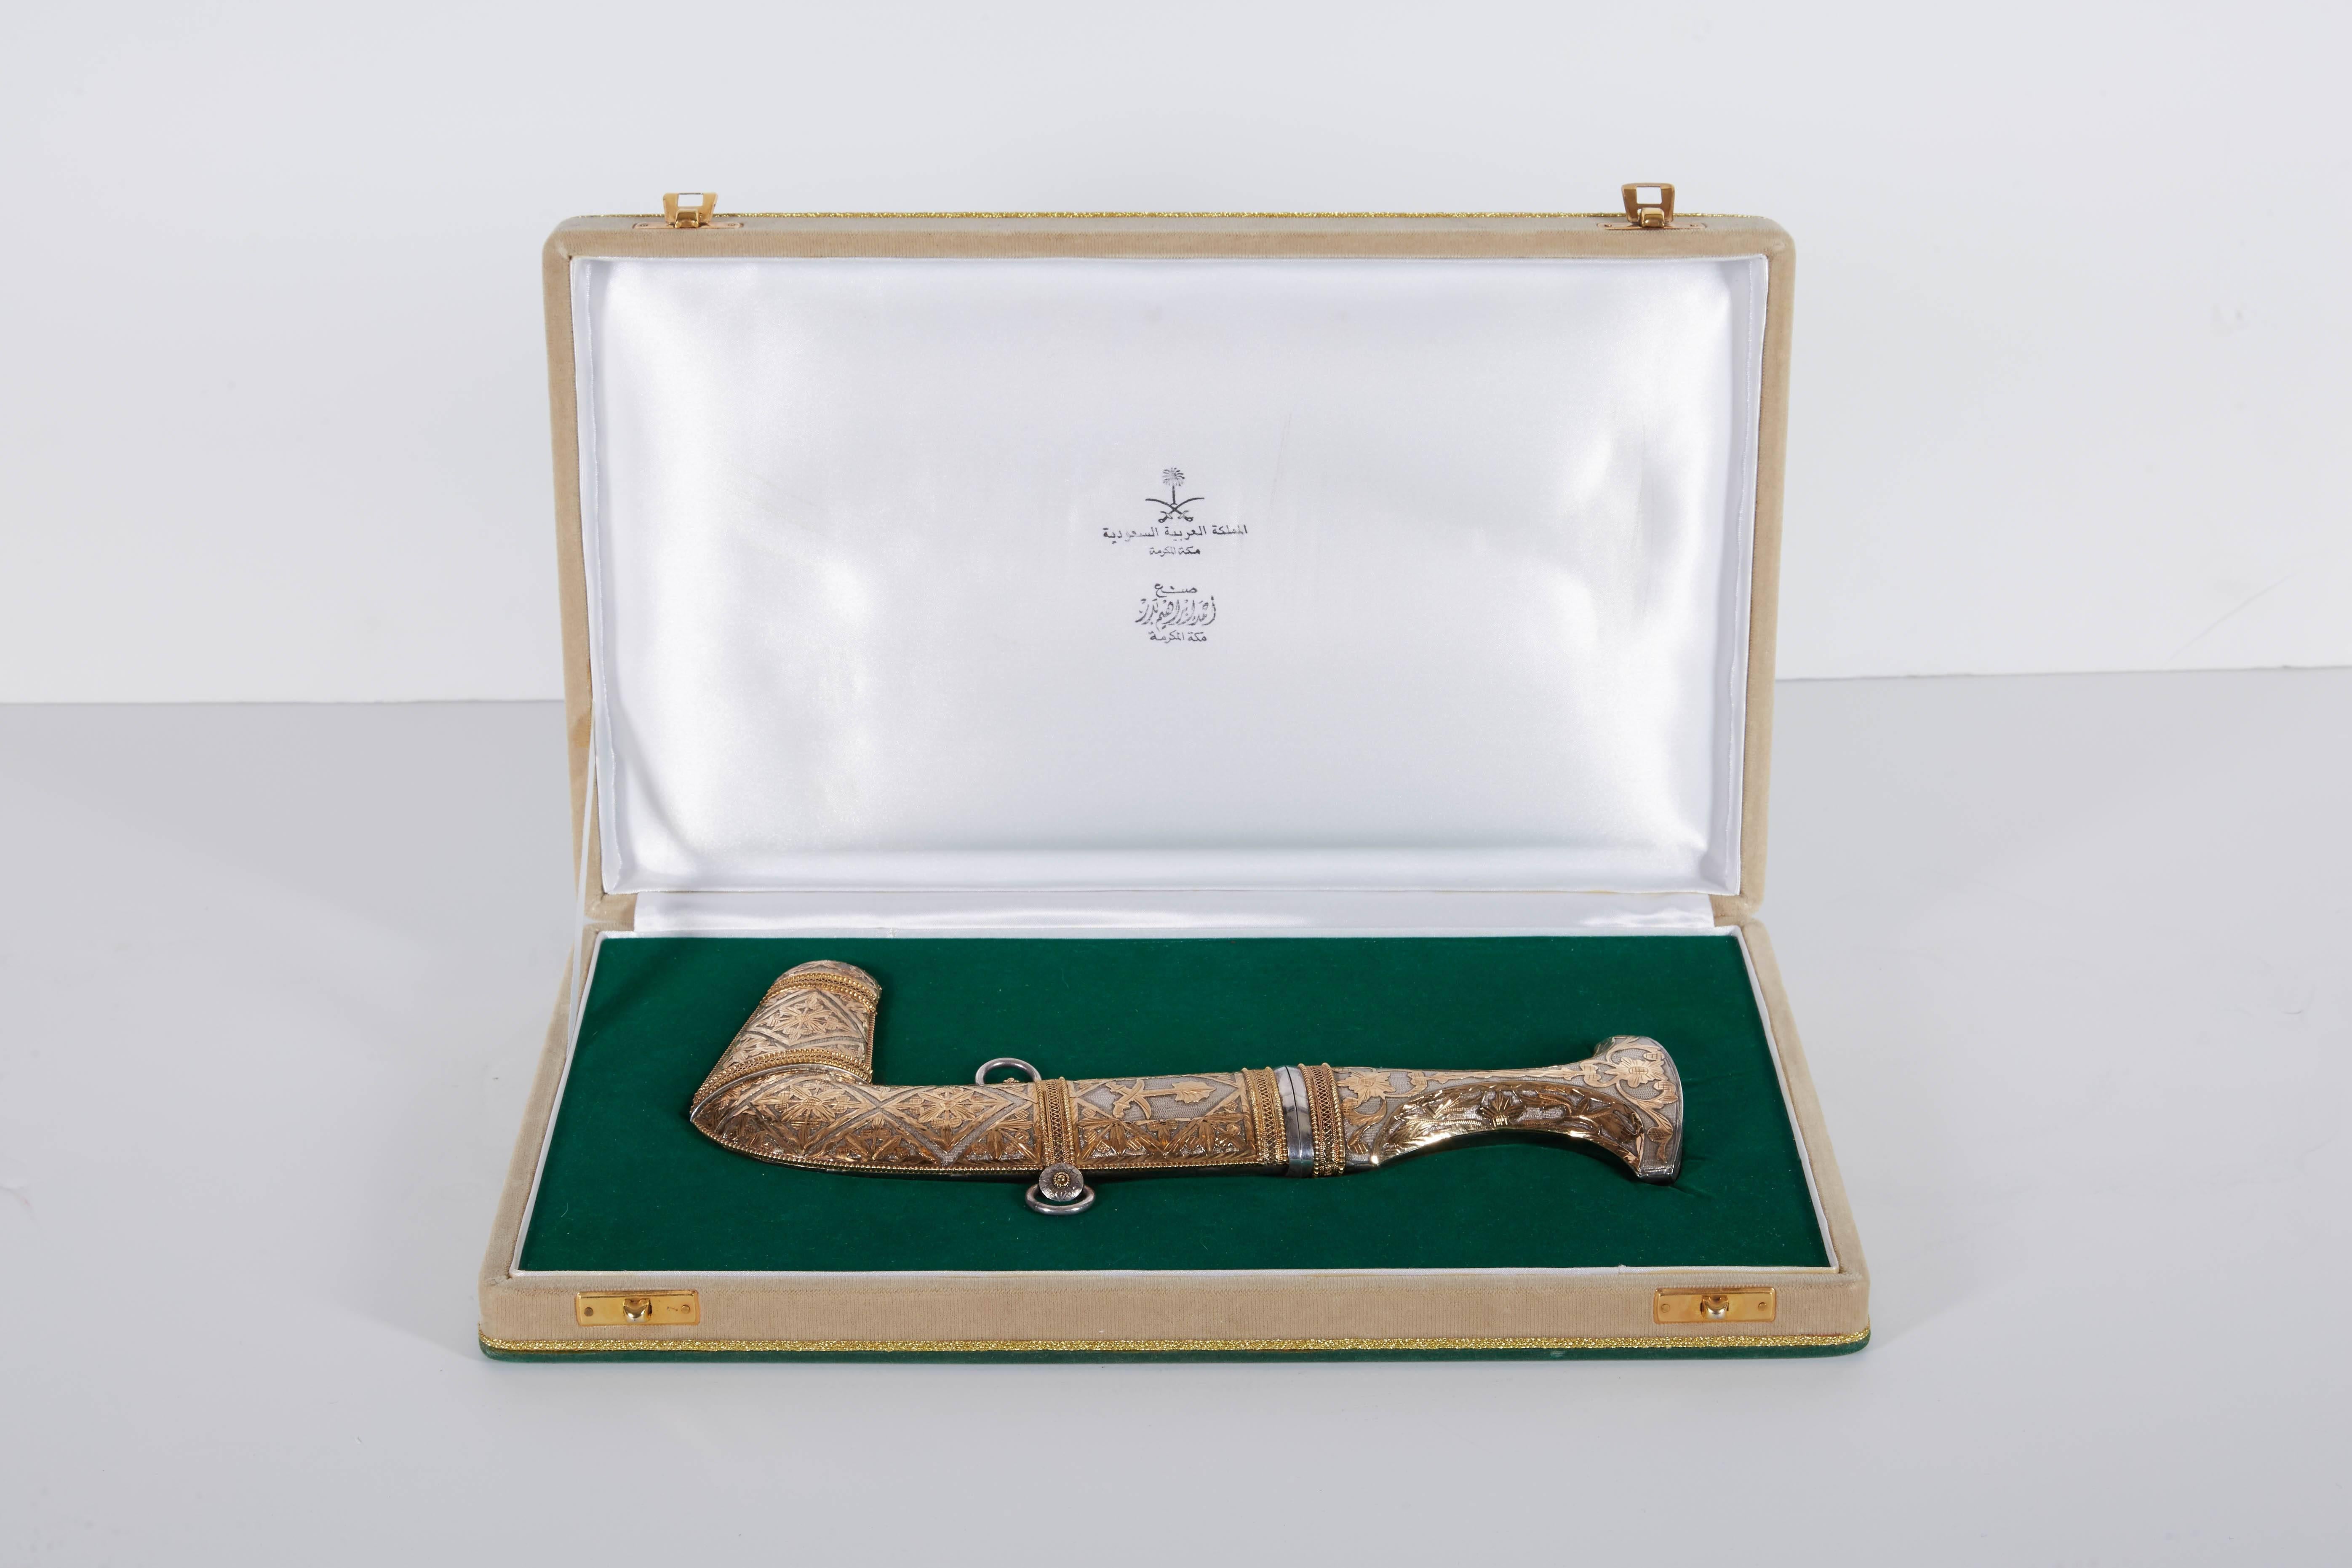 A fine silver and gold Royal Saudi Arabian presentation Dagger Jambiya Khanjar in fitted original box.

Signed by artist.

Made to give as gifts to royal members / officials of Saudi Arabia,

20th century.

Measure: Dagger 11